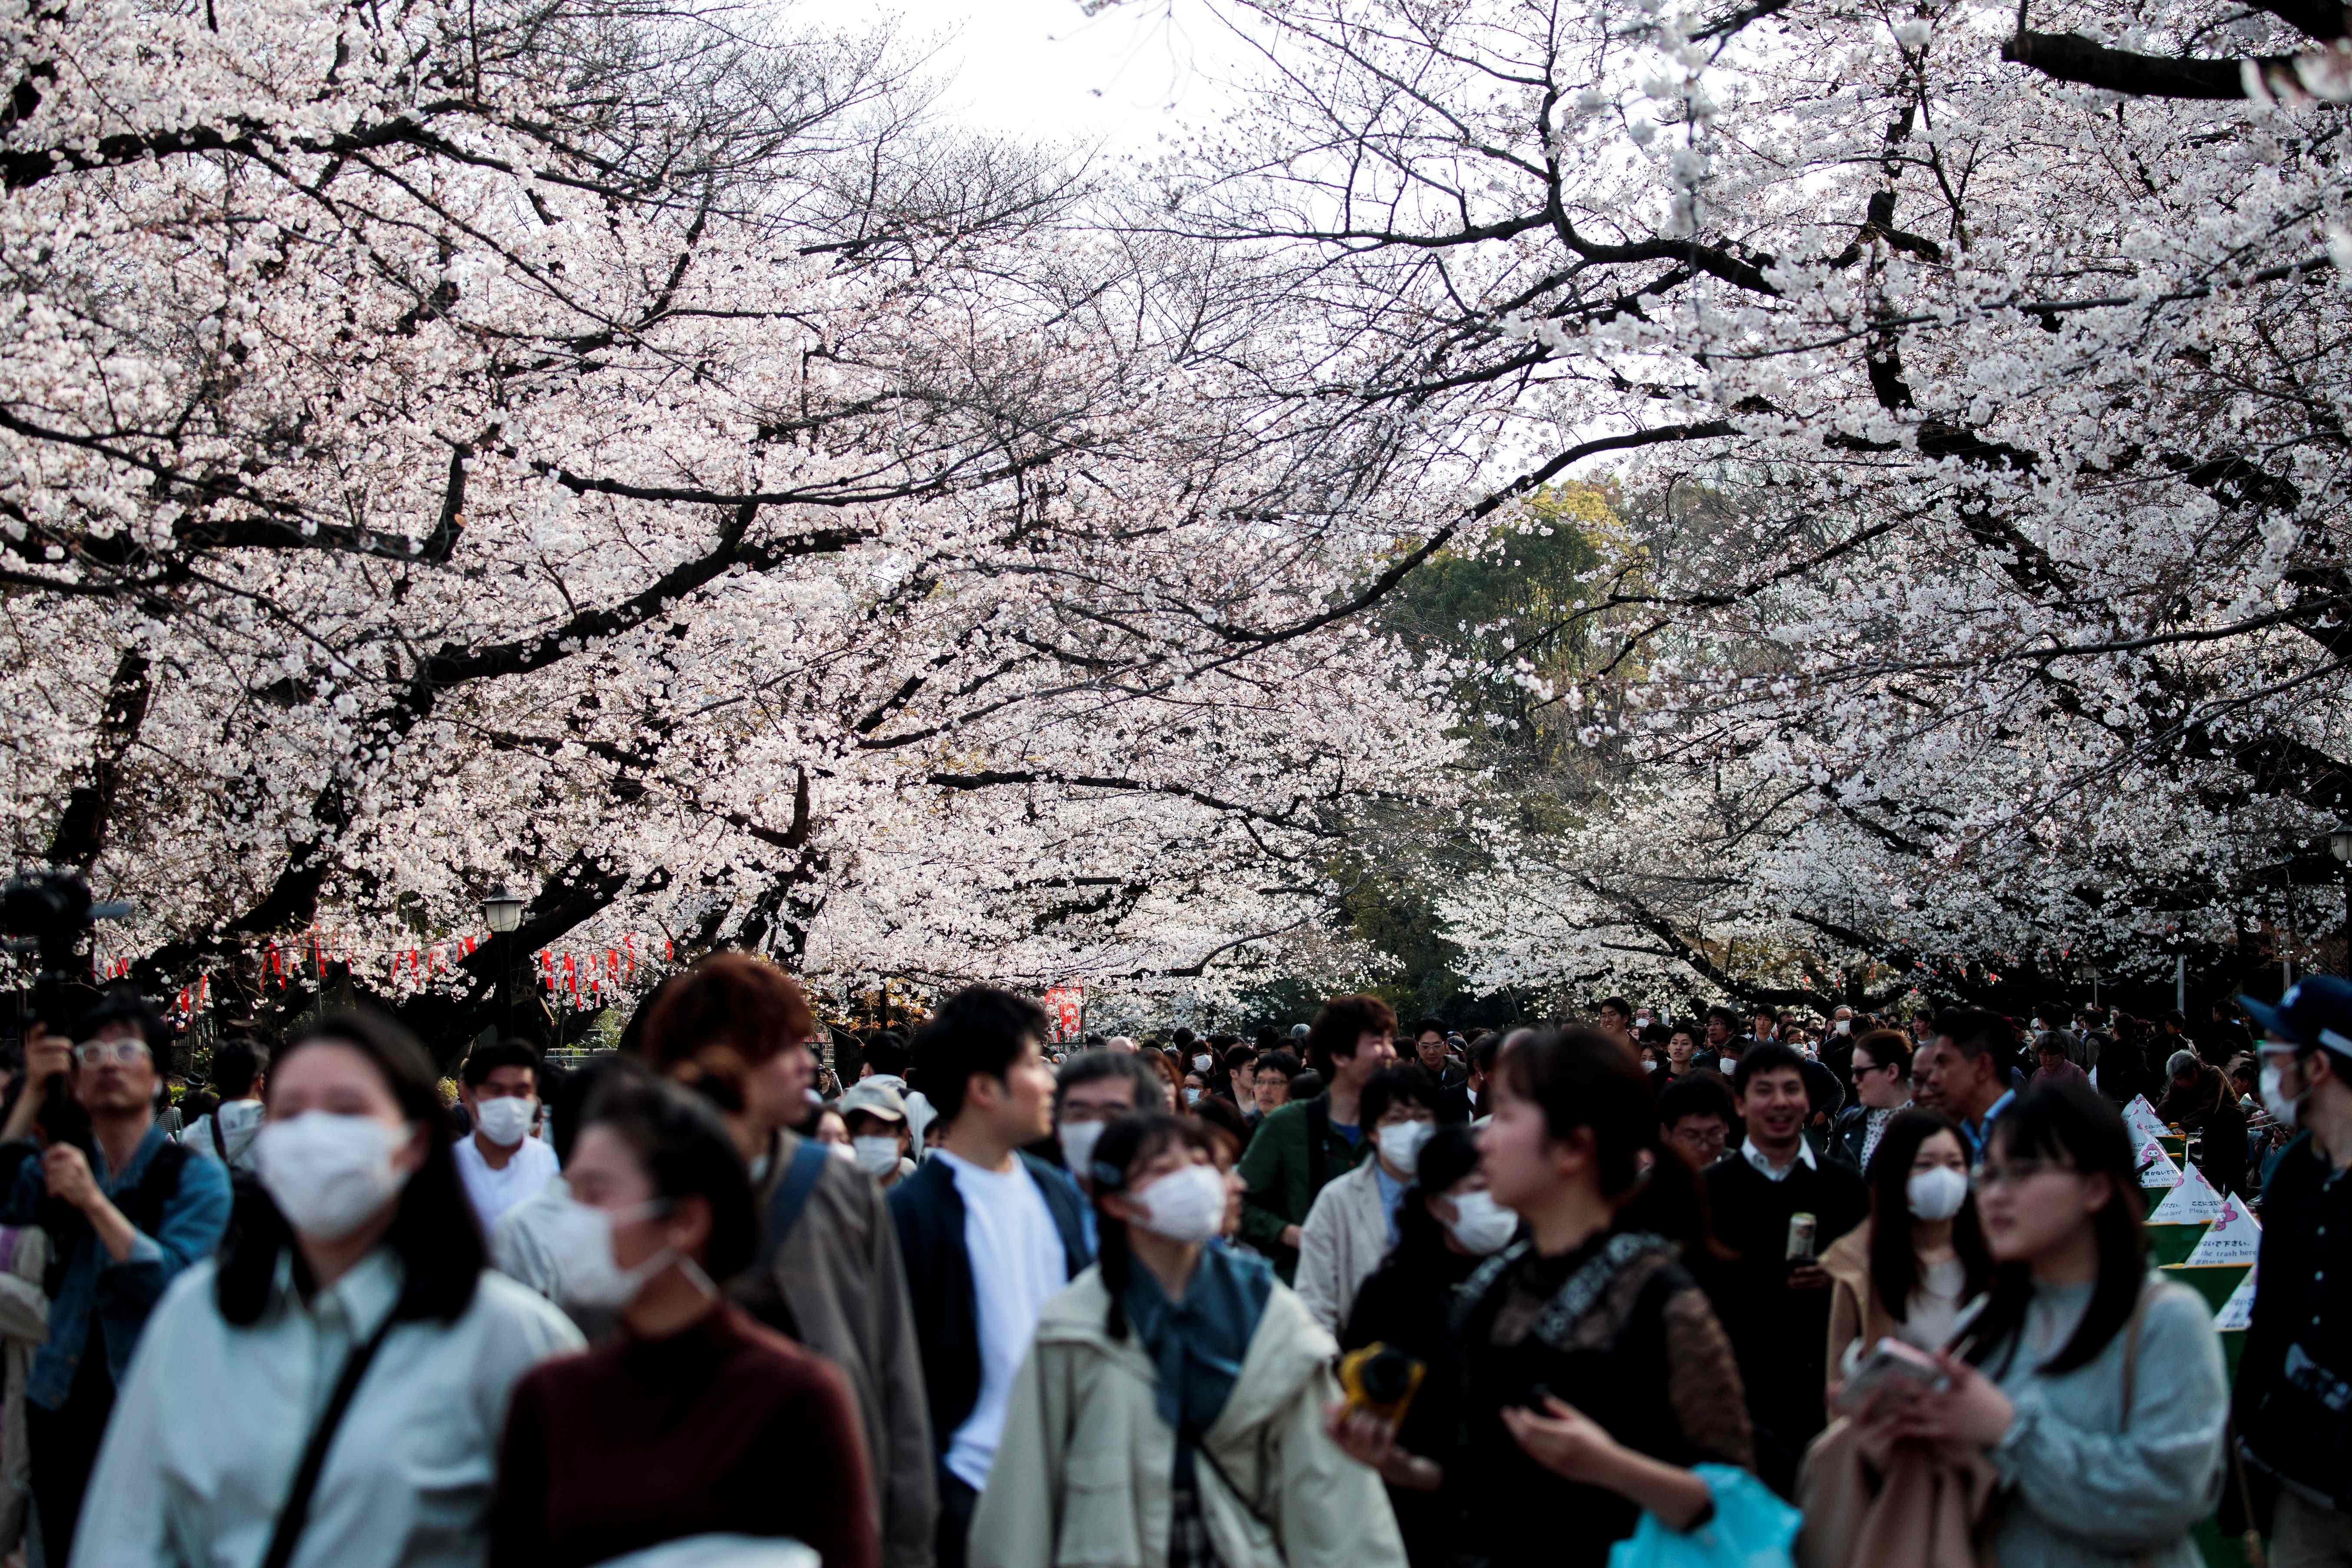 People wearing face masks, amid concerns of the COVID-19 coronavirus, walk under the cherry blossoms at Ueno park in Tokyo. (AFP Photo)